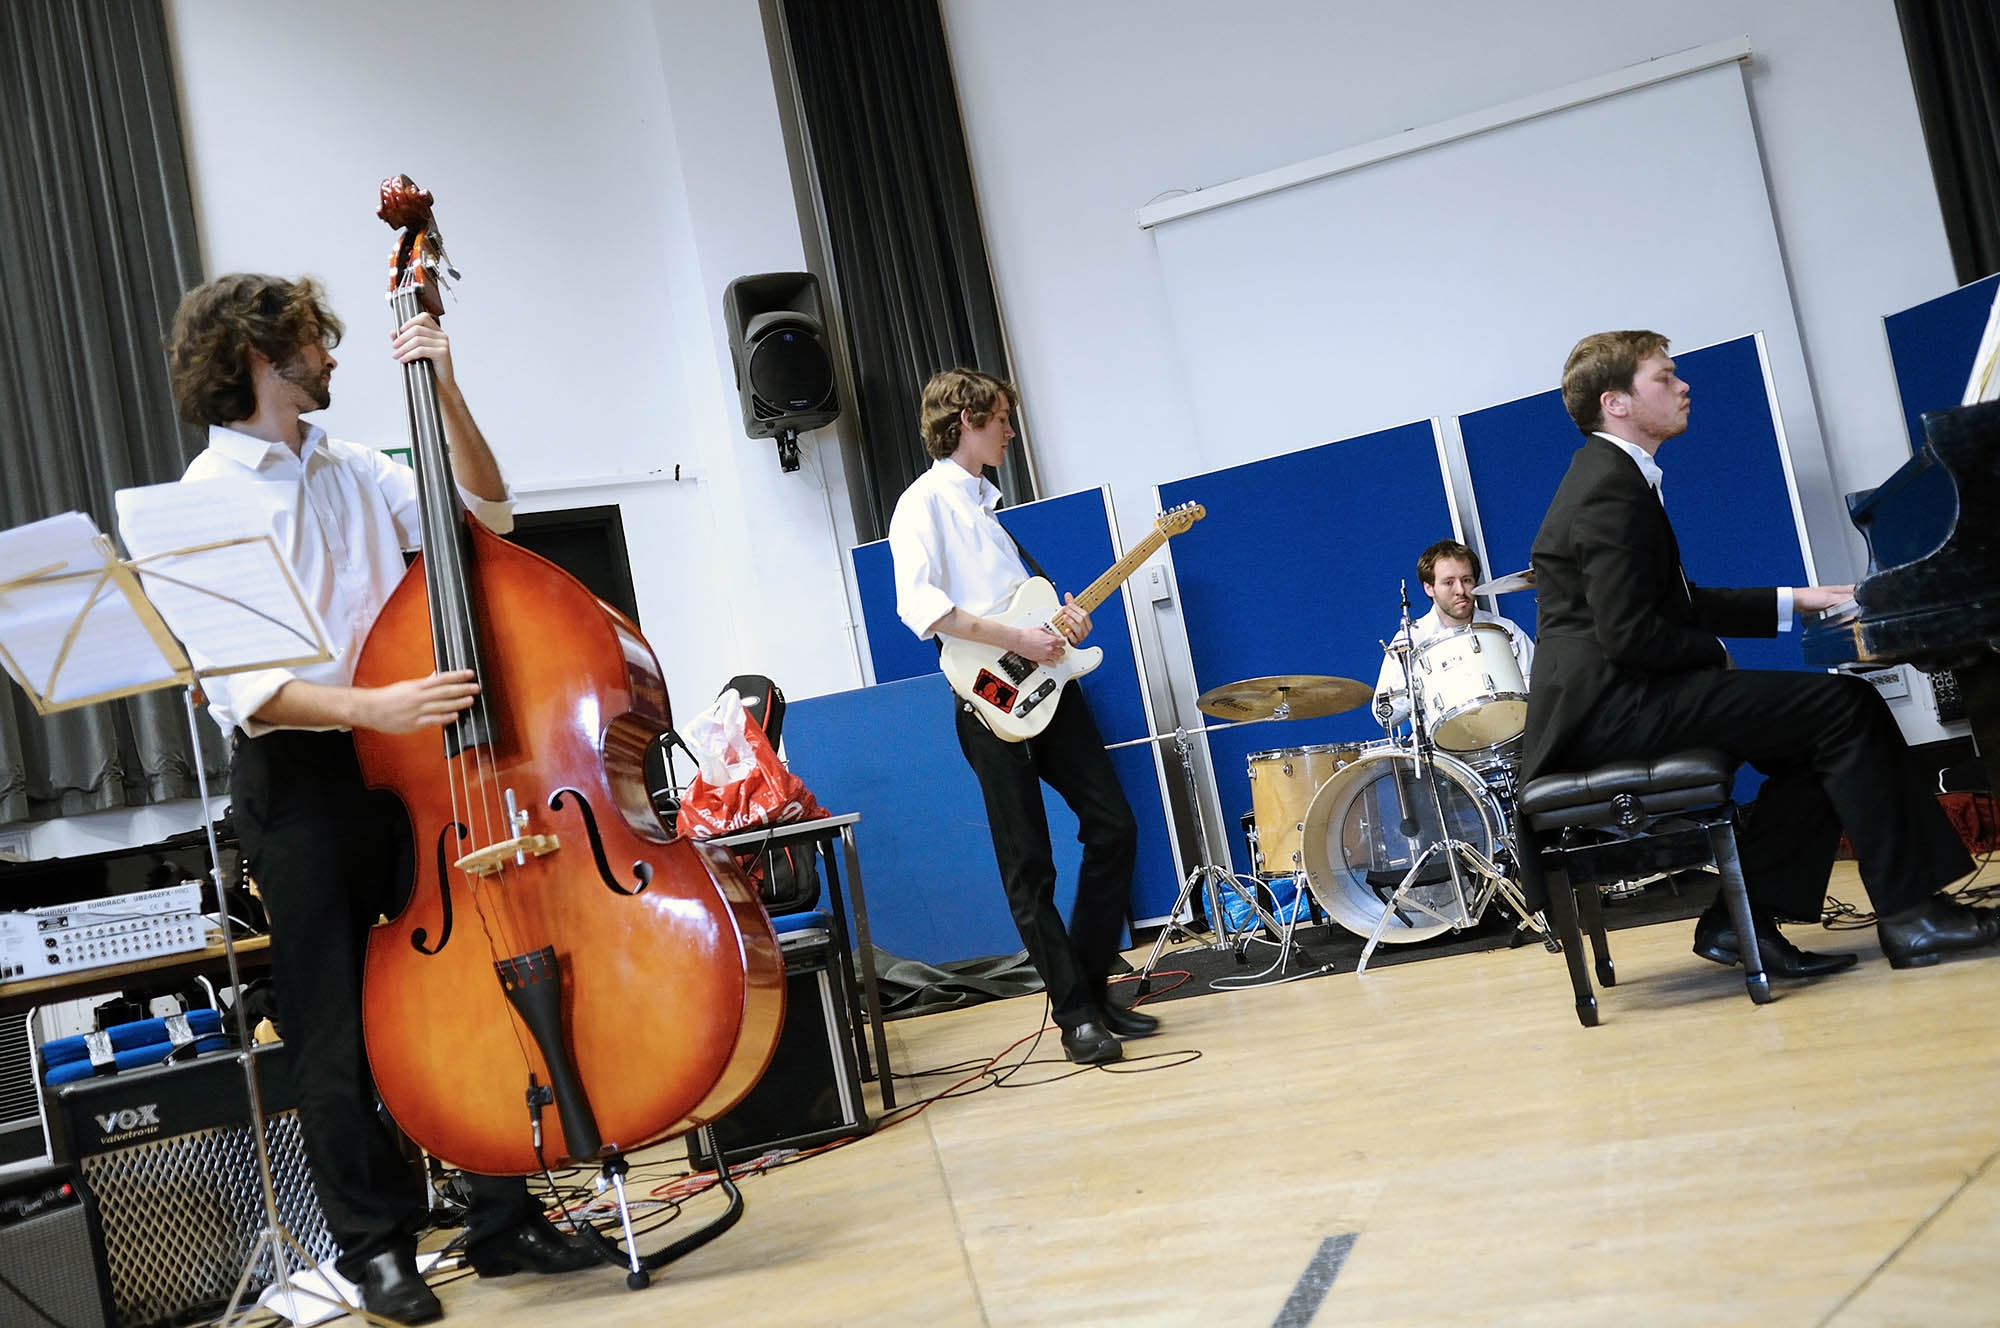 Music students rehearsing in one of the studios at Coombehurst House